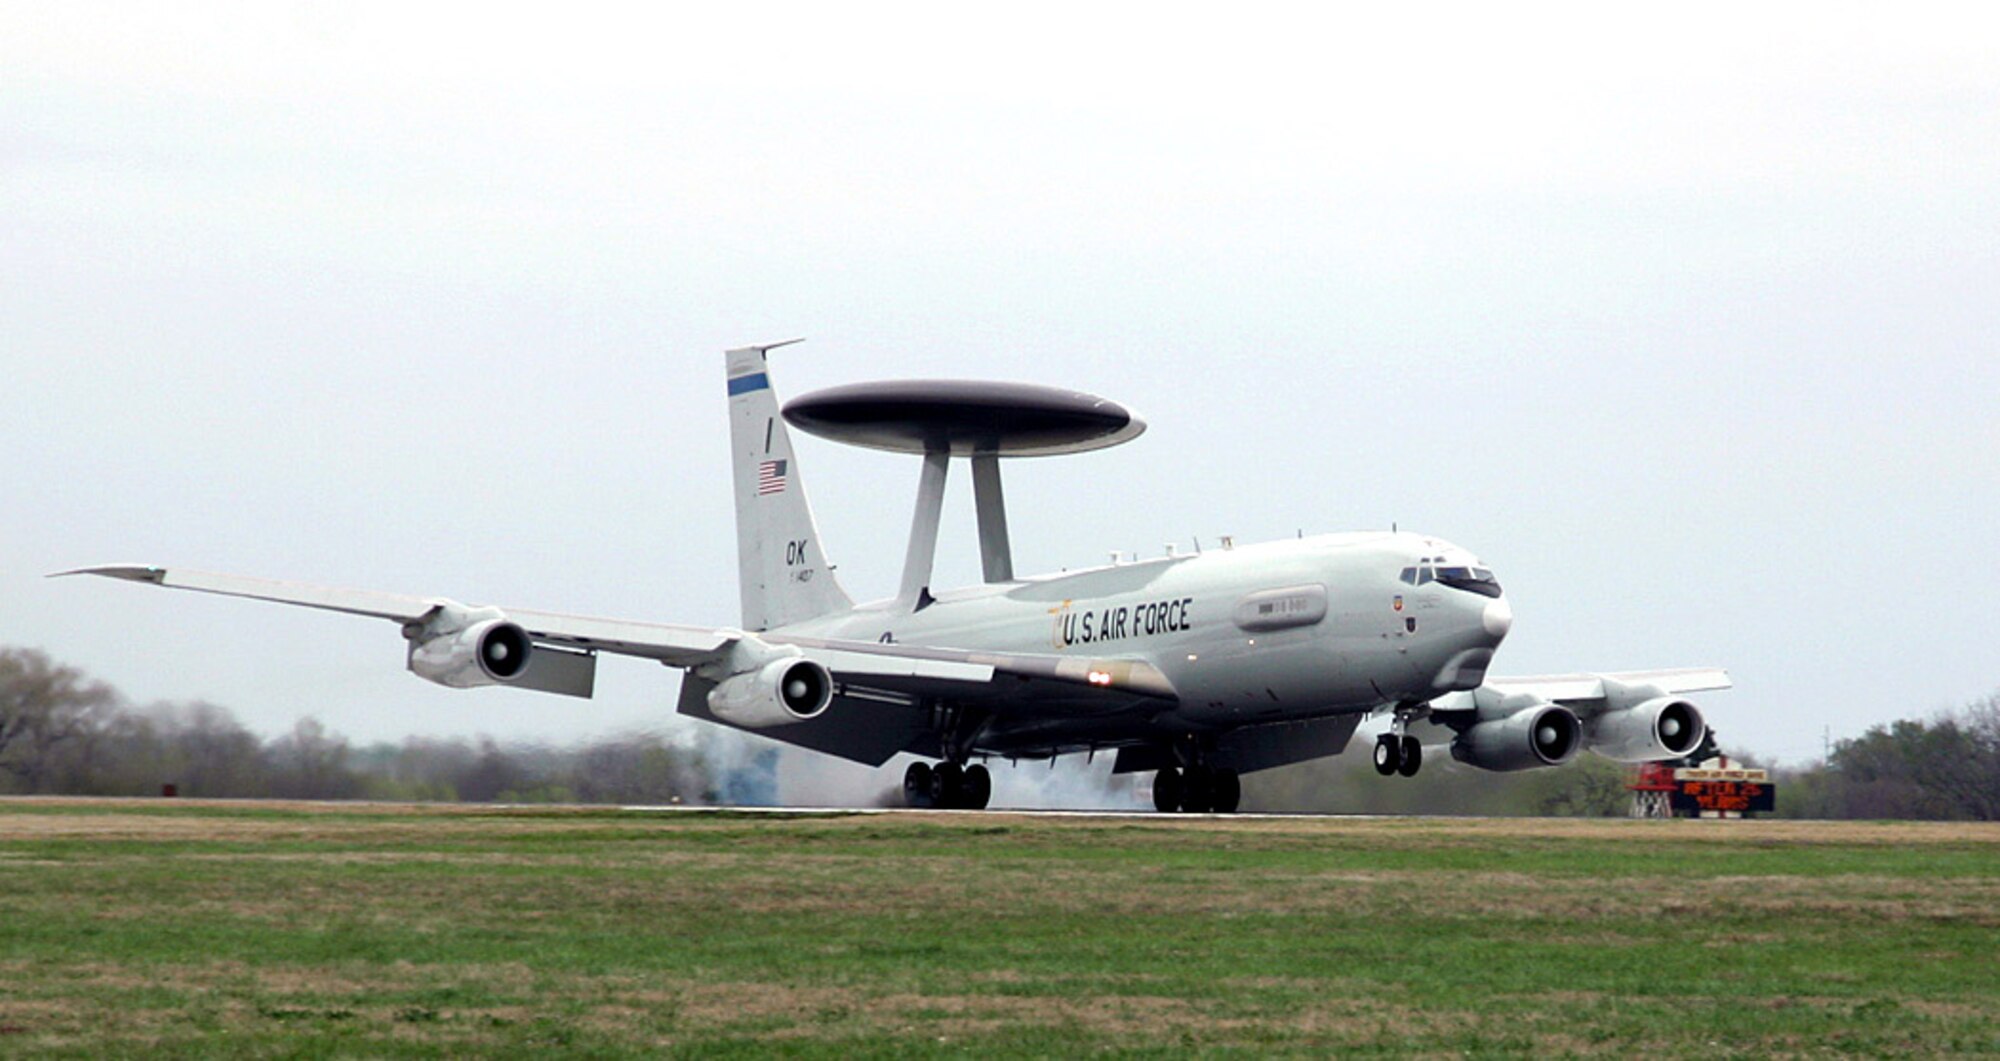 An E-3 Sentry airborne warning and control system aircraft, known as AWACS, lands at Tinker Air Force Base, Okla., March 23 after completing a mission.  The first E-3 touched down at Tinker exactly 30 years to the day and began an new era for air surveillance.  (U.S. Air Force photo/Staff Sgt. Stacy Fowler)